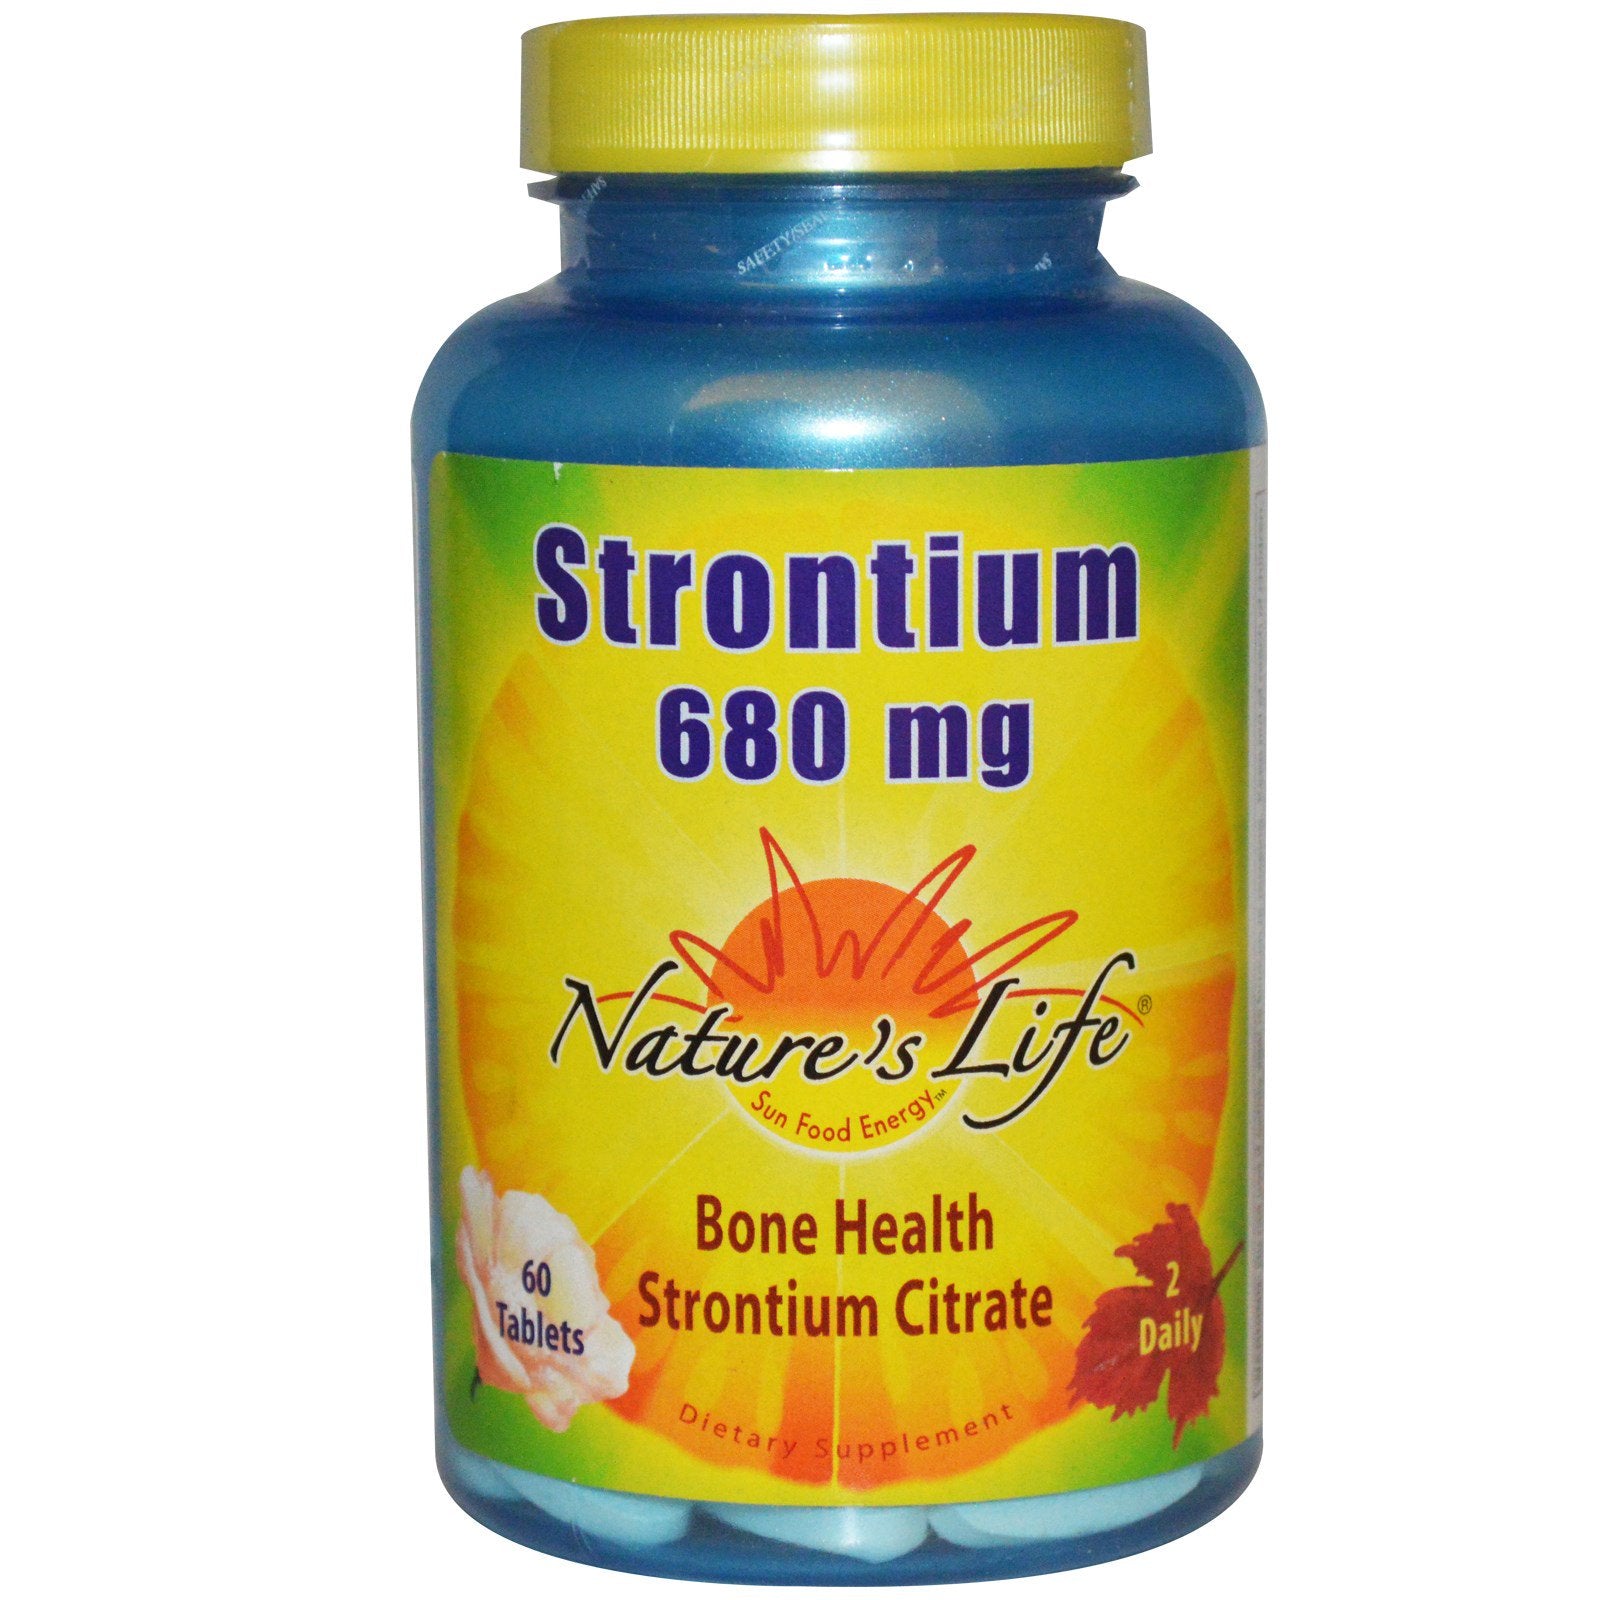 Nature's Life, Strontium, 680 mg, 60 Tablets